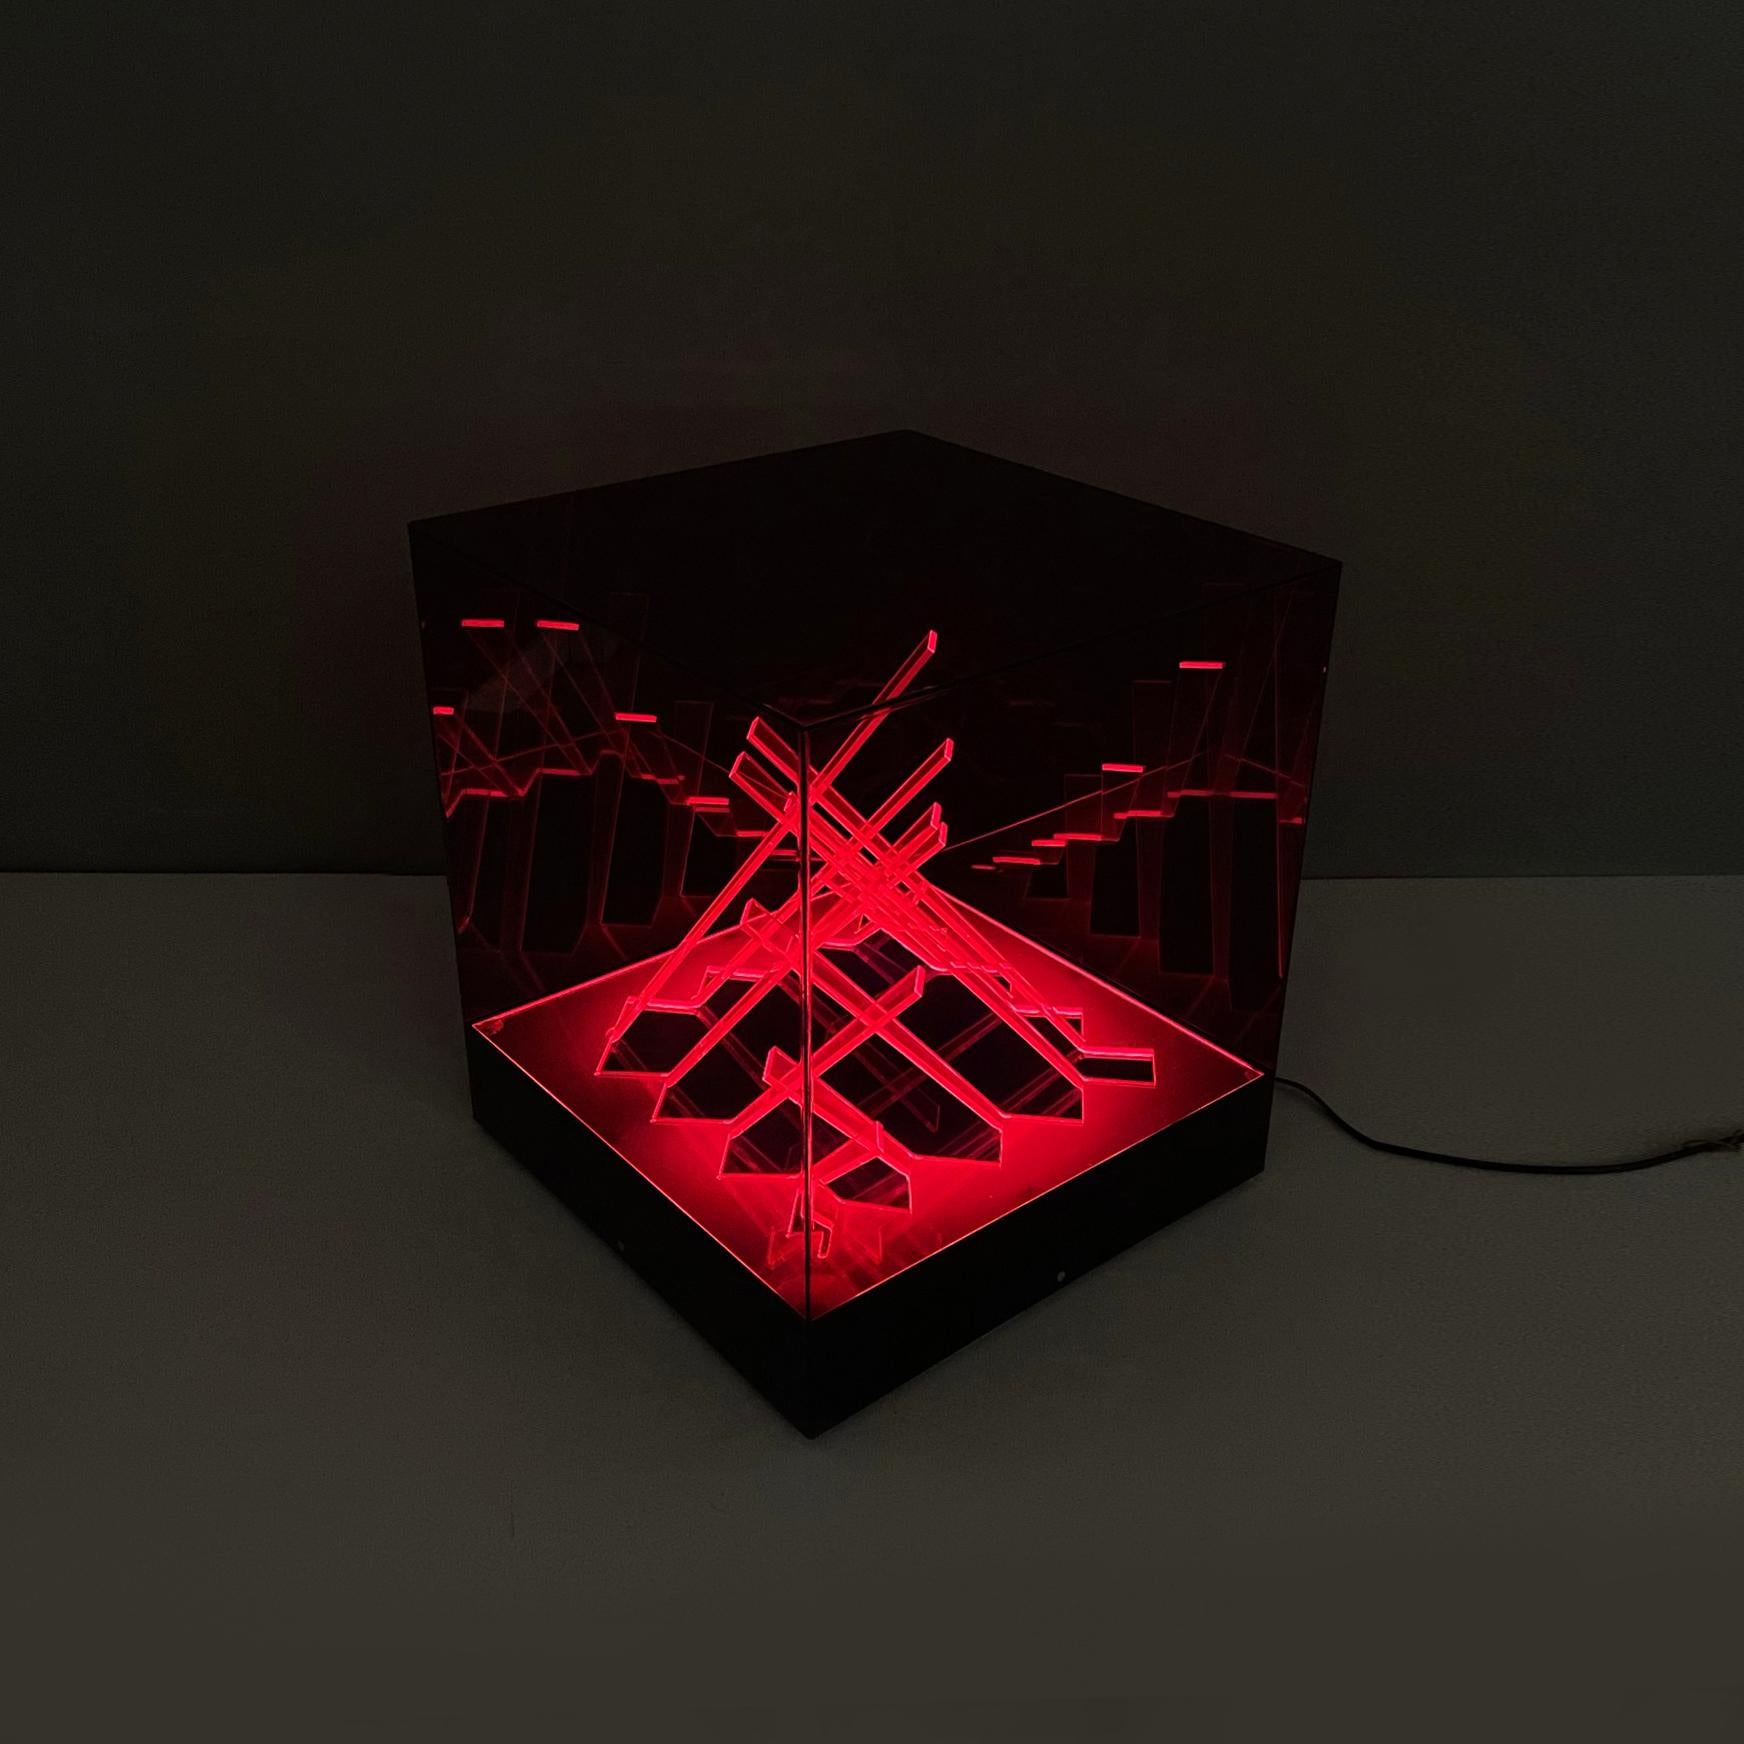 Italian Modern Sculture Table lamp Cubo di Teo by Rivière Arte Industria Lissone, 1970s
Table lamp mod. Cubo di Teo in red acrylic glass. This cubic sculpture has a series of curved and intertwined rectangles inside. Below is the light source that